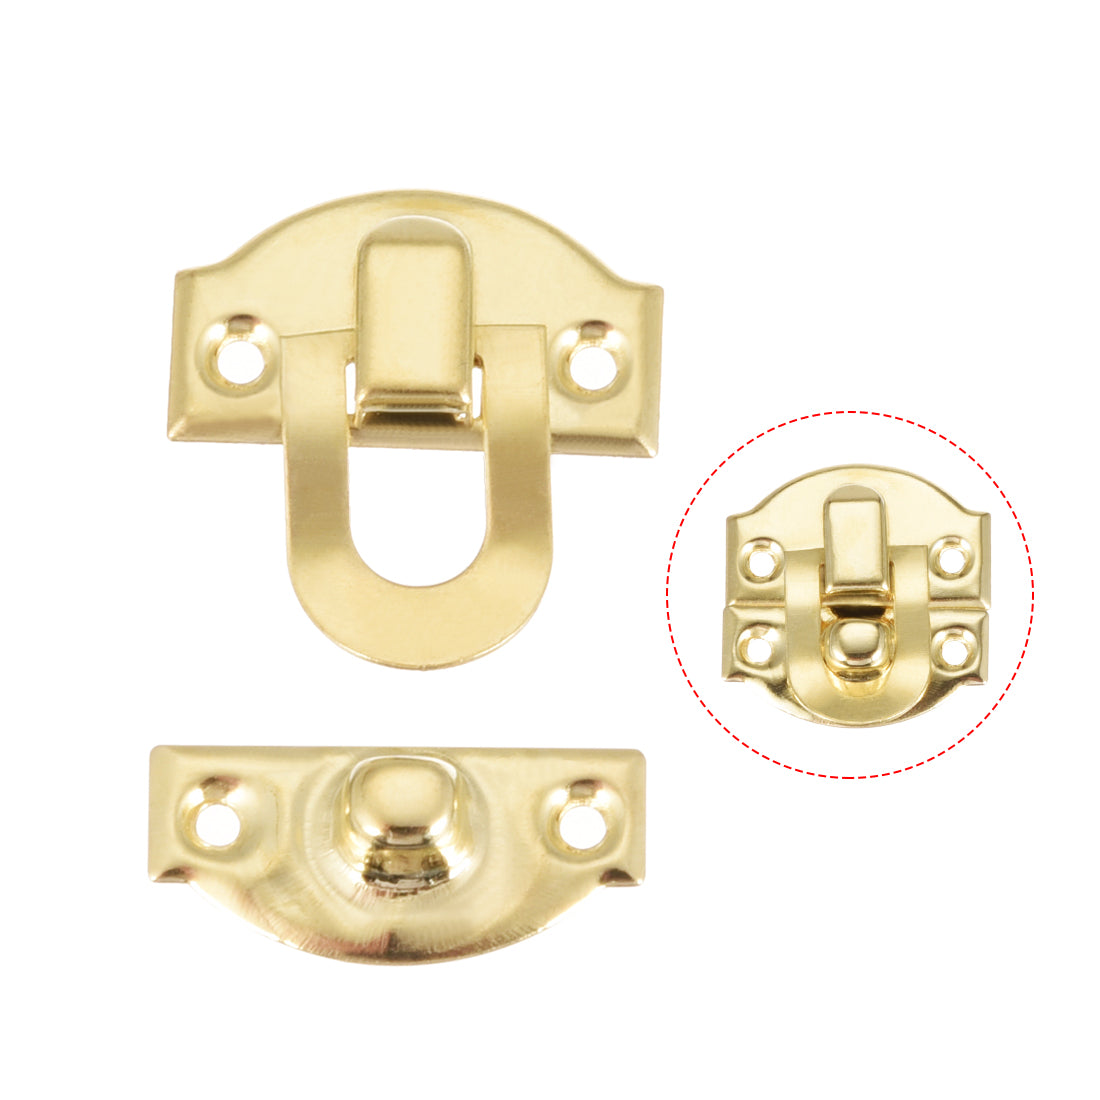 uxcell Uxcell Box Latch, 21 x 20mm Retro Style Small Size Golden Decorative Hasp Jewelry cases Catch w Screws 20 pcs